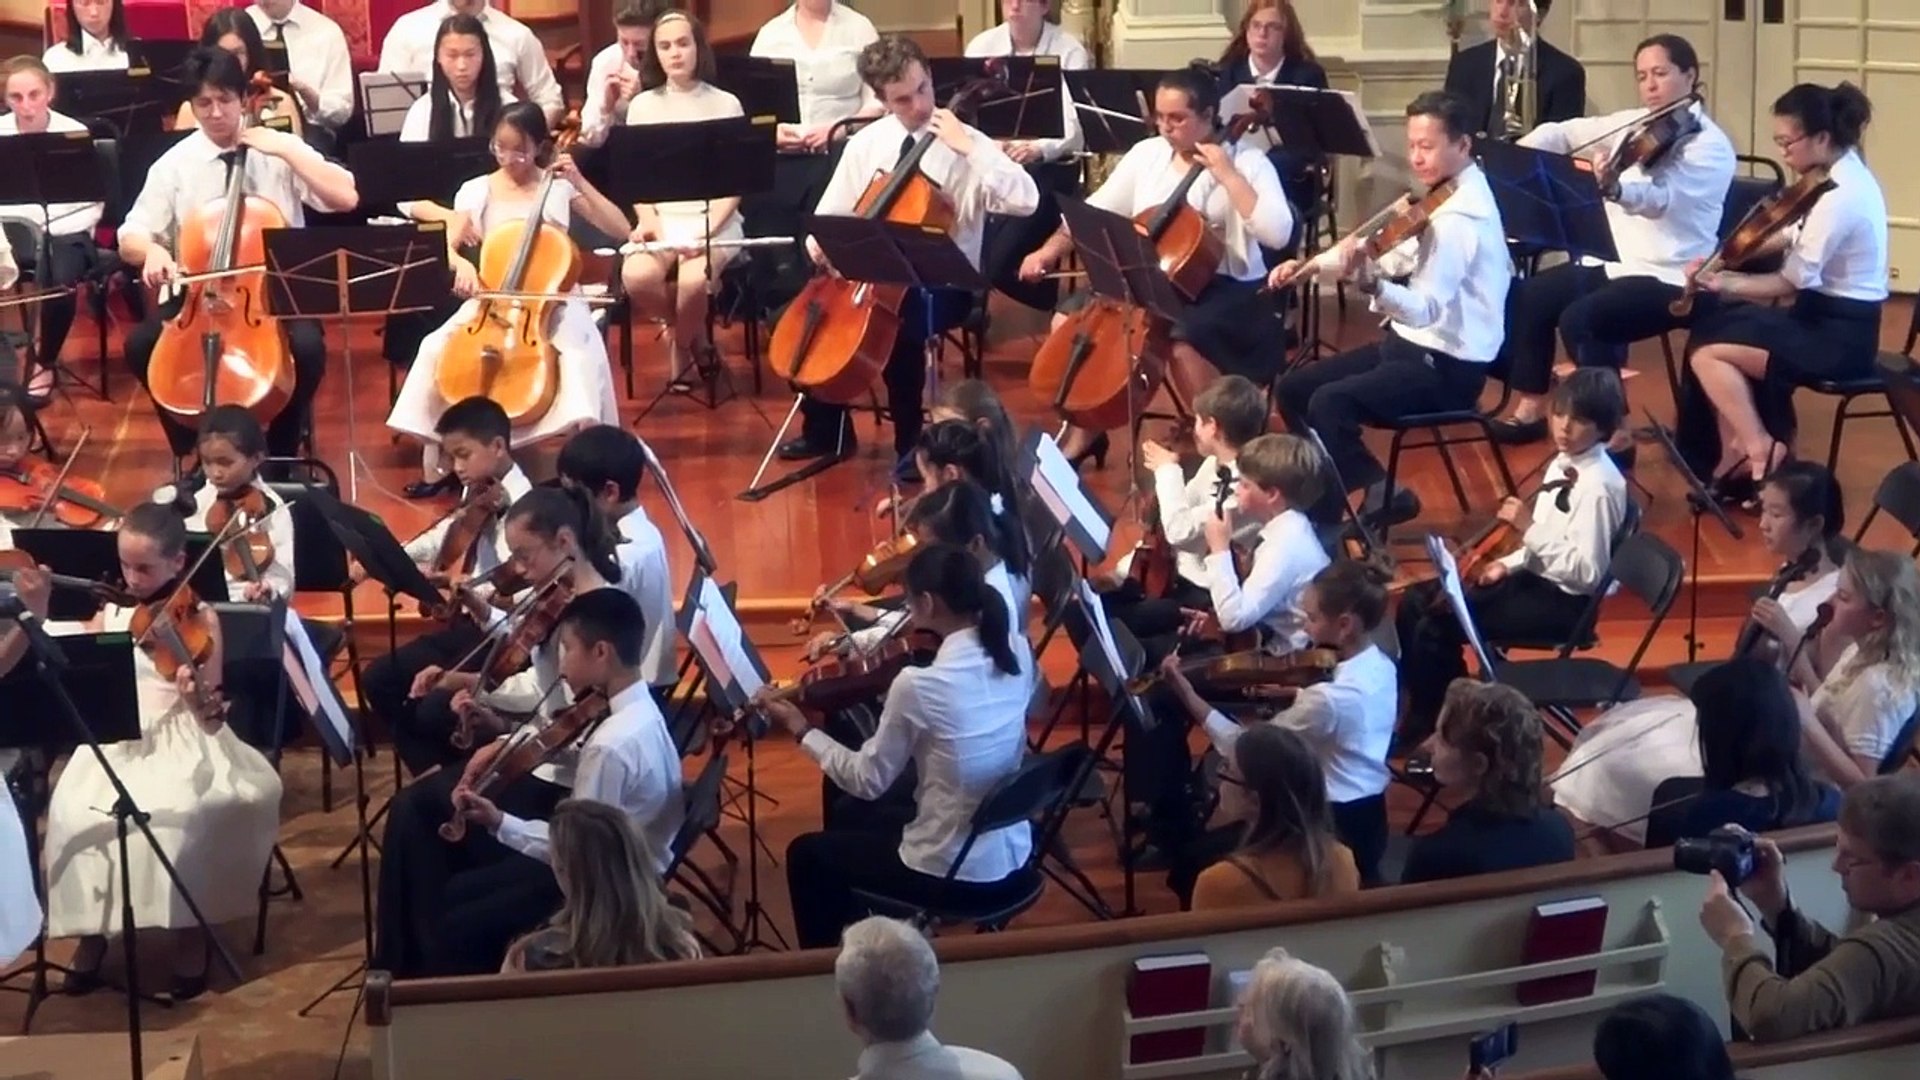 Sunset Youth Orchestra - Theme from Schindler's List on May 15, 2016